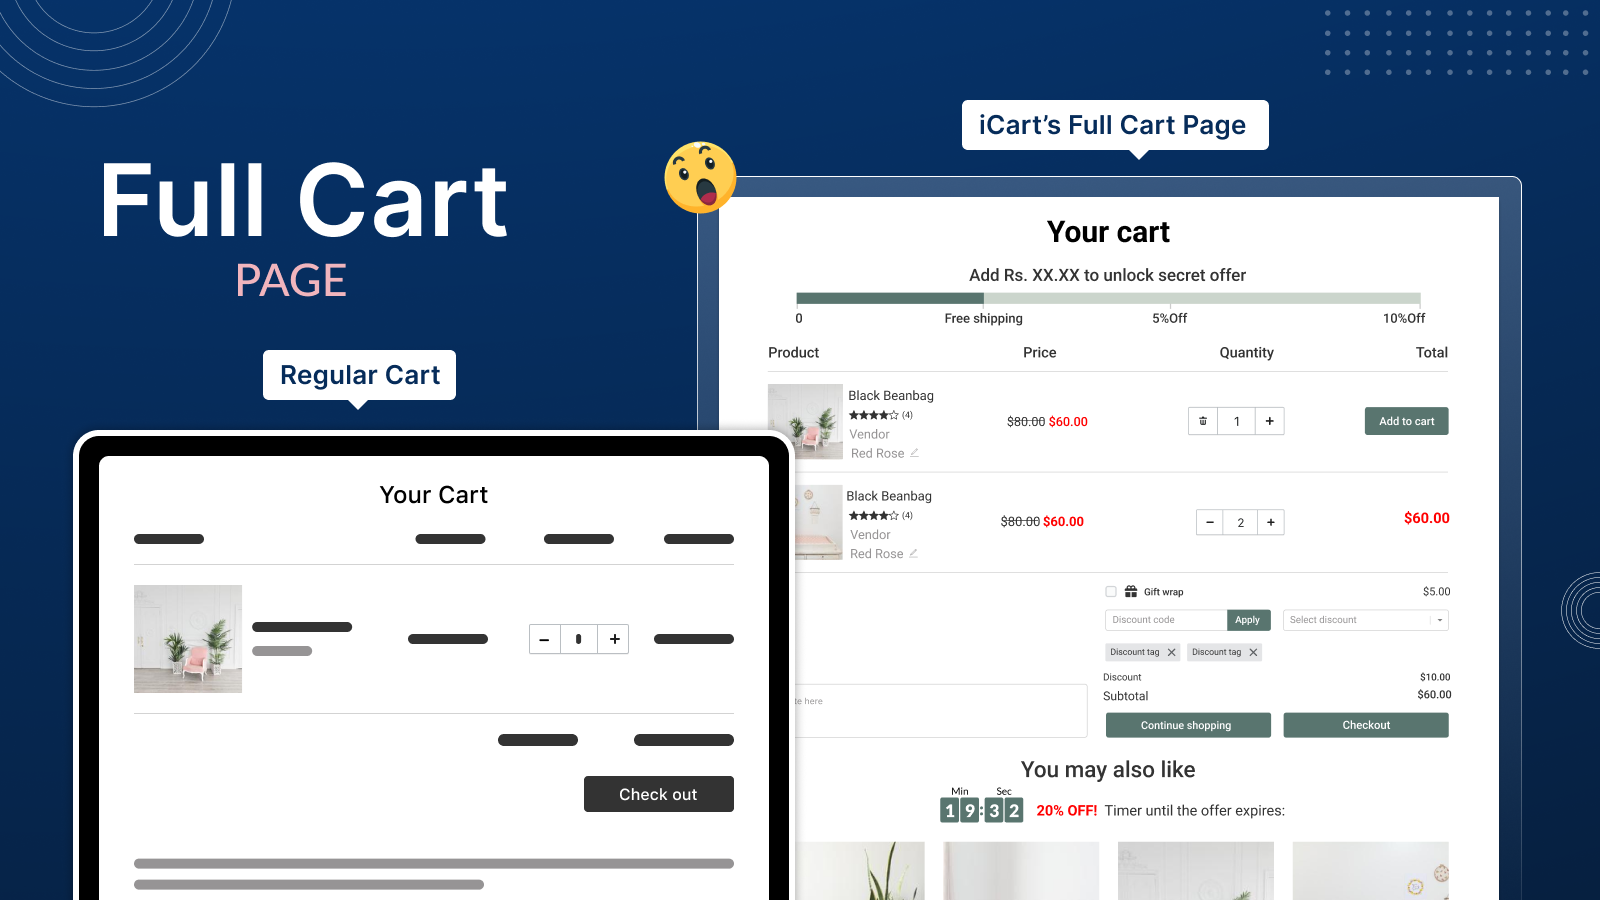 Track performance of iCart in your store with its analytics